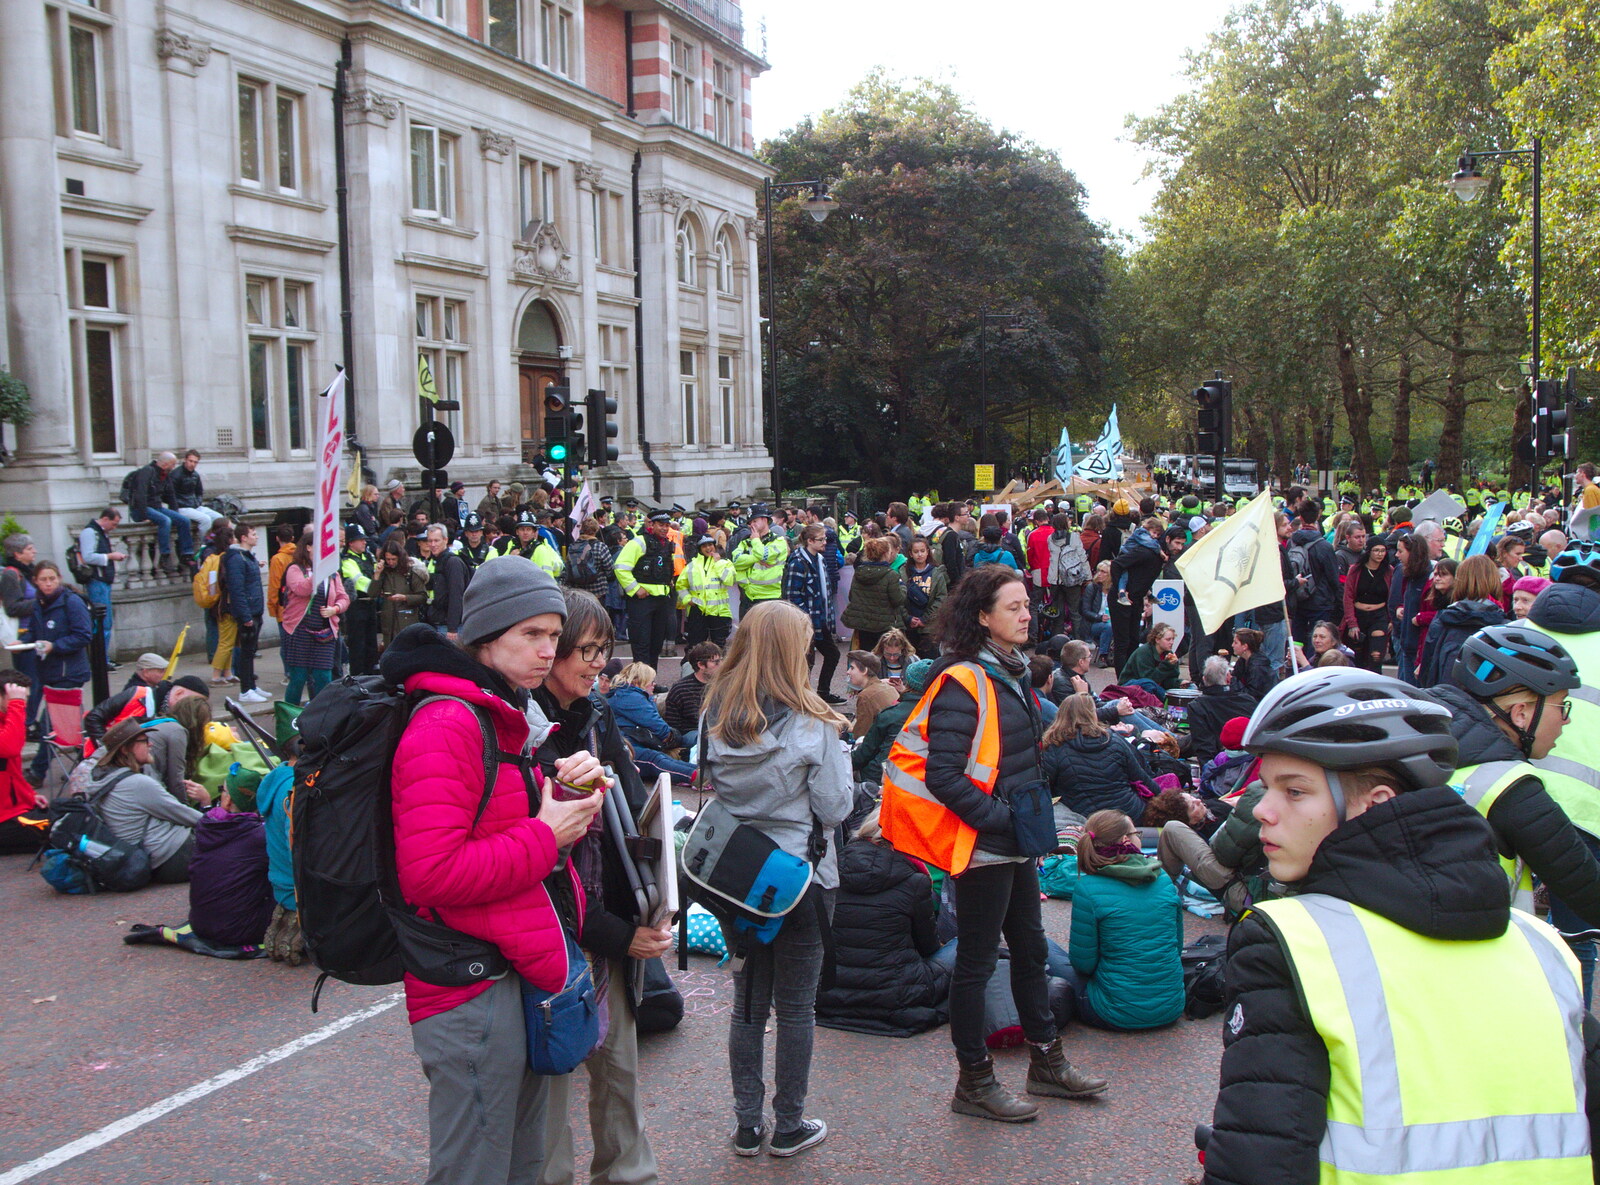 People on the streets of Westminster from The Extinction Rebellion Protest, Westminster, London - 9th October 2019